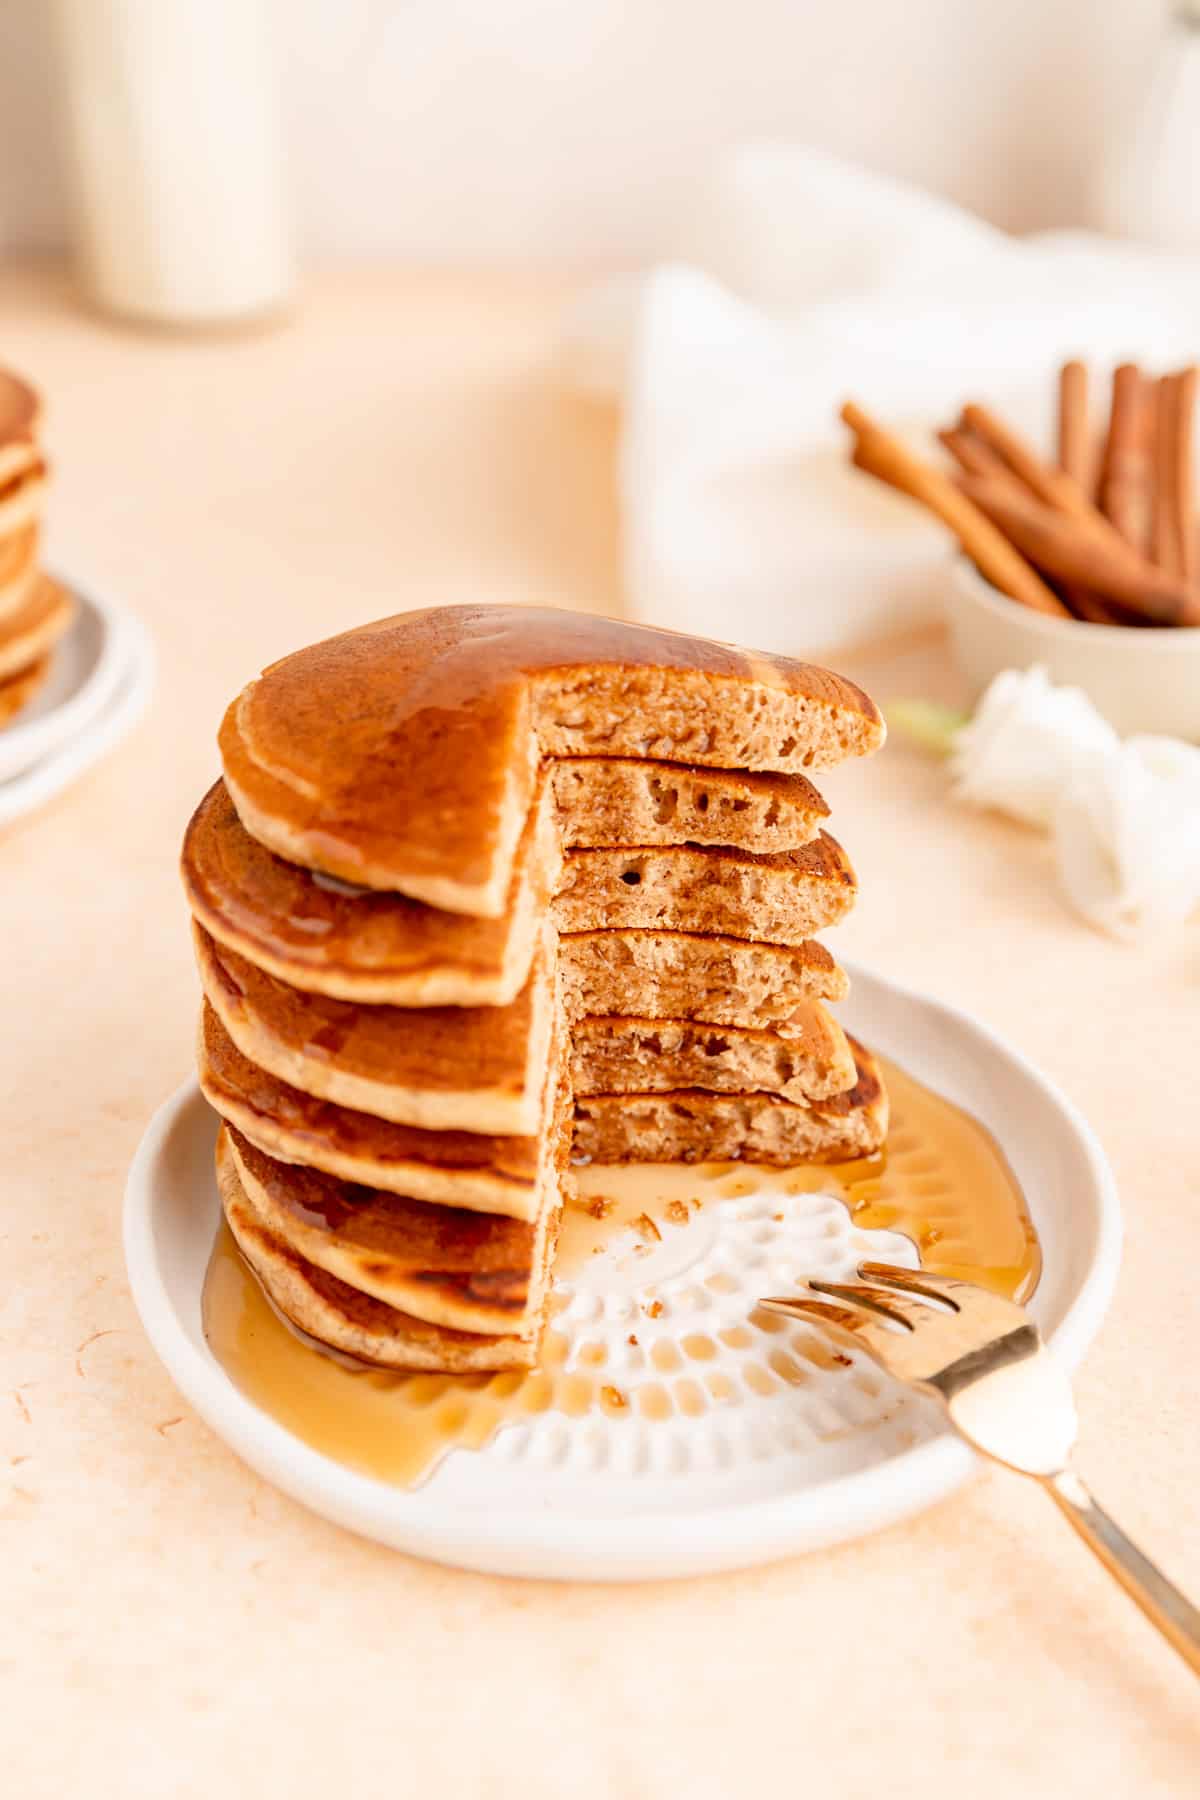 Side view of six pancakes stack with corner cut out and syrup dripping down.